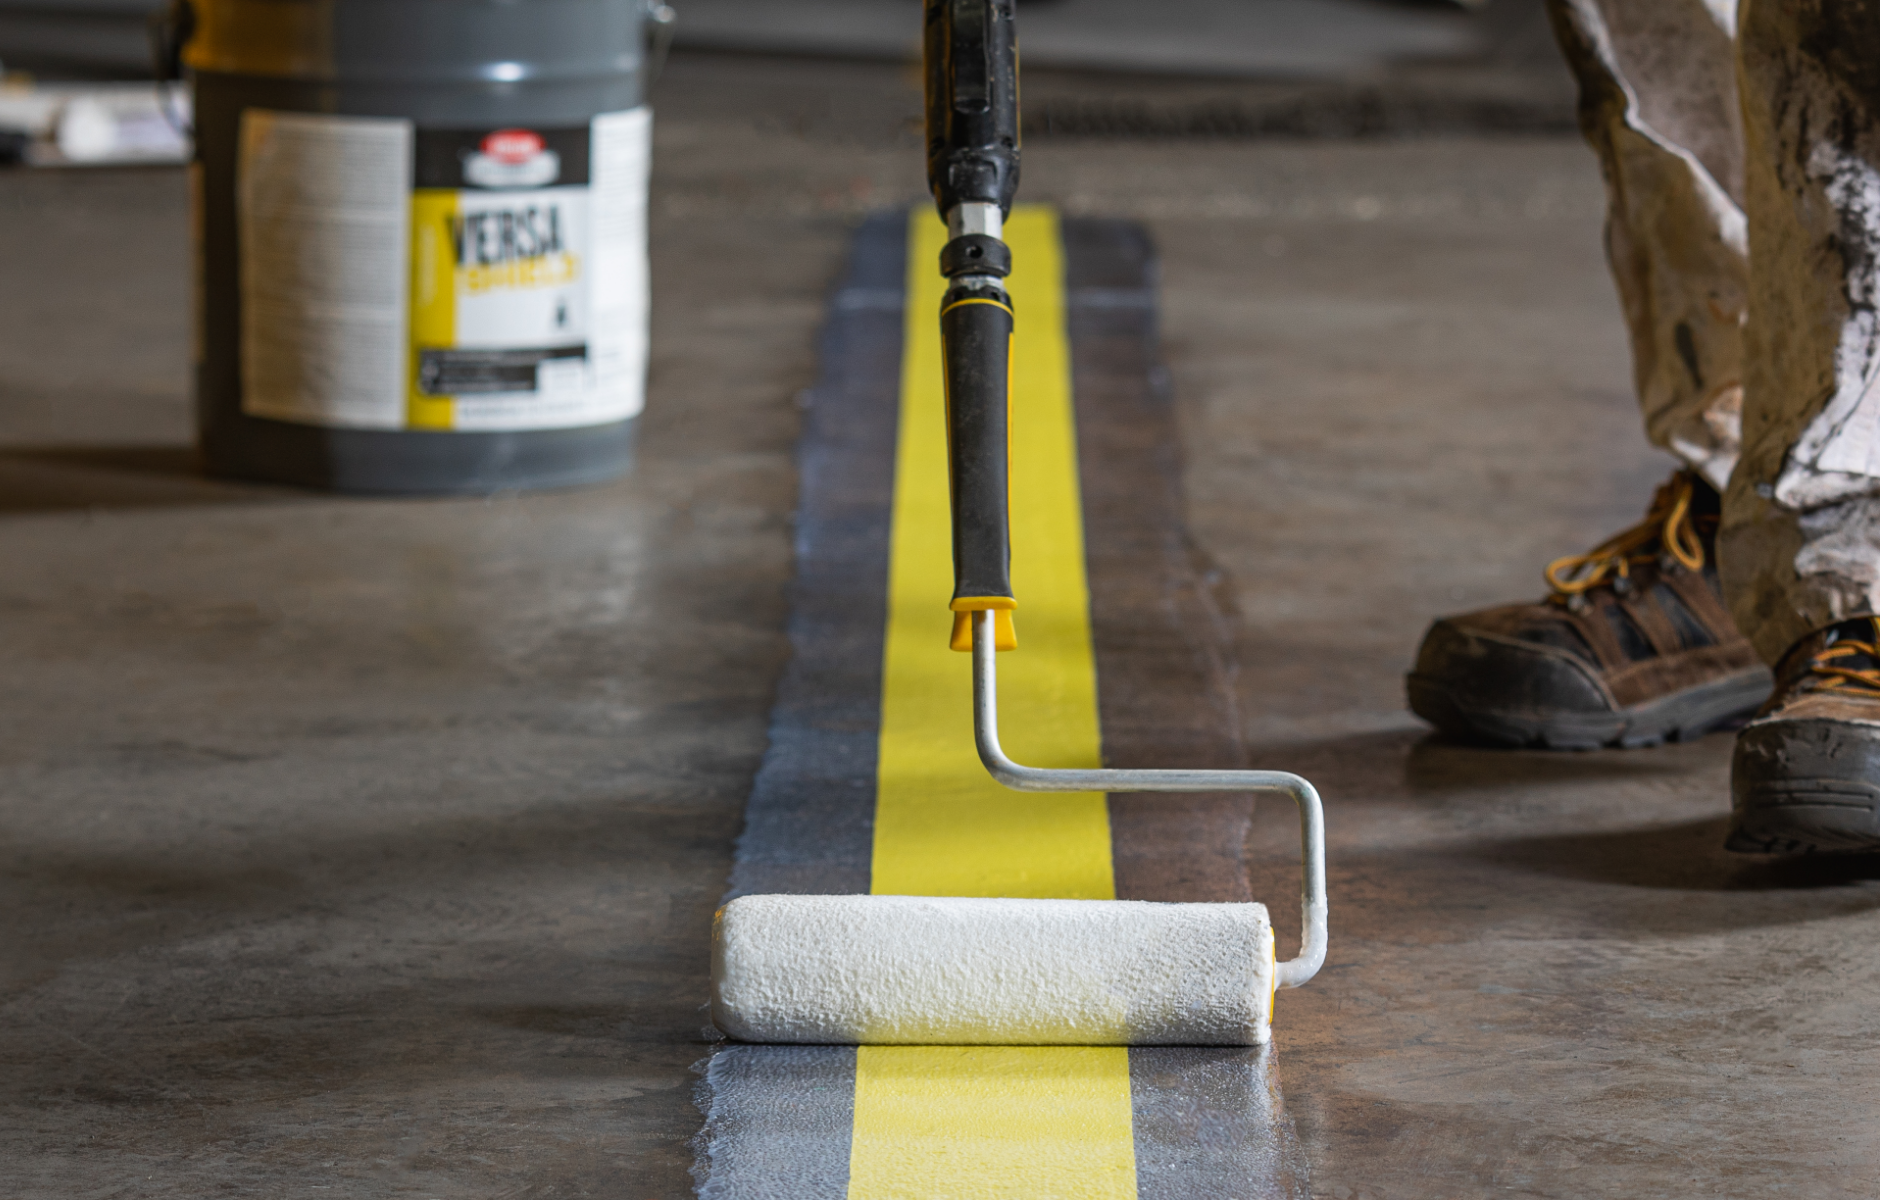 Rolling/painting lines onto a concrete floor